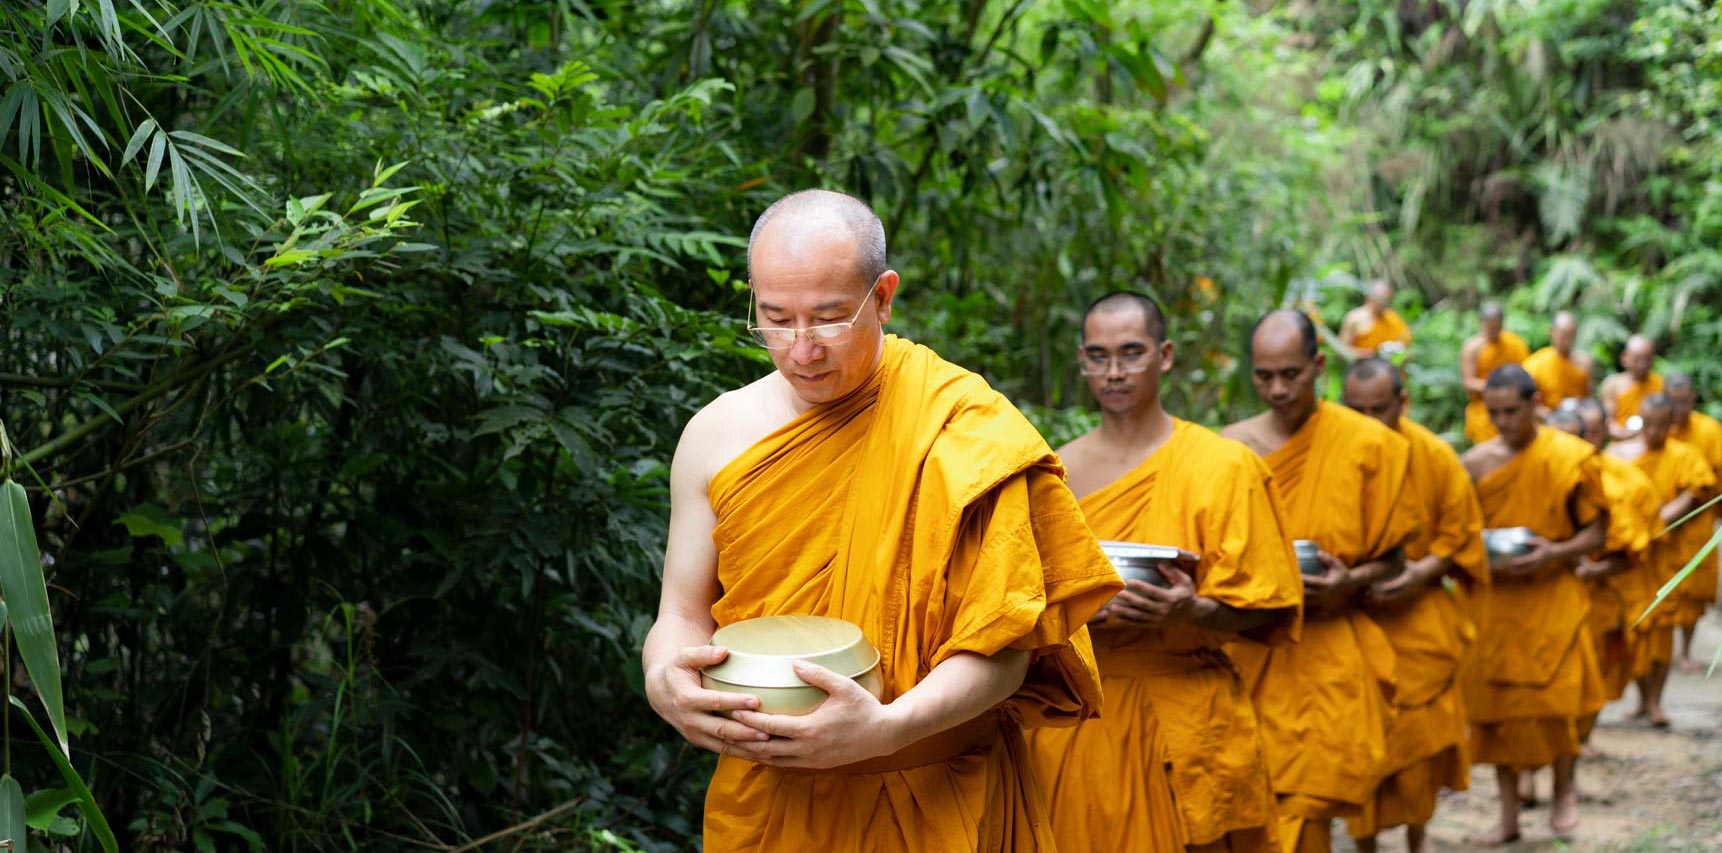 Food Offering & Alms Round in Buddhism